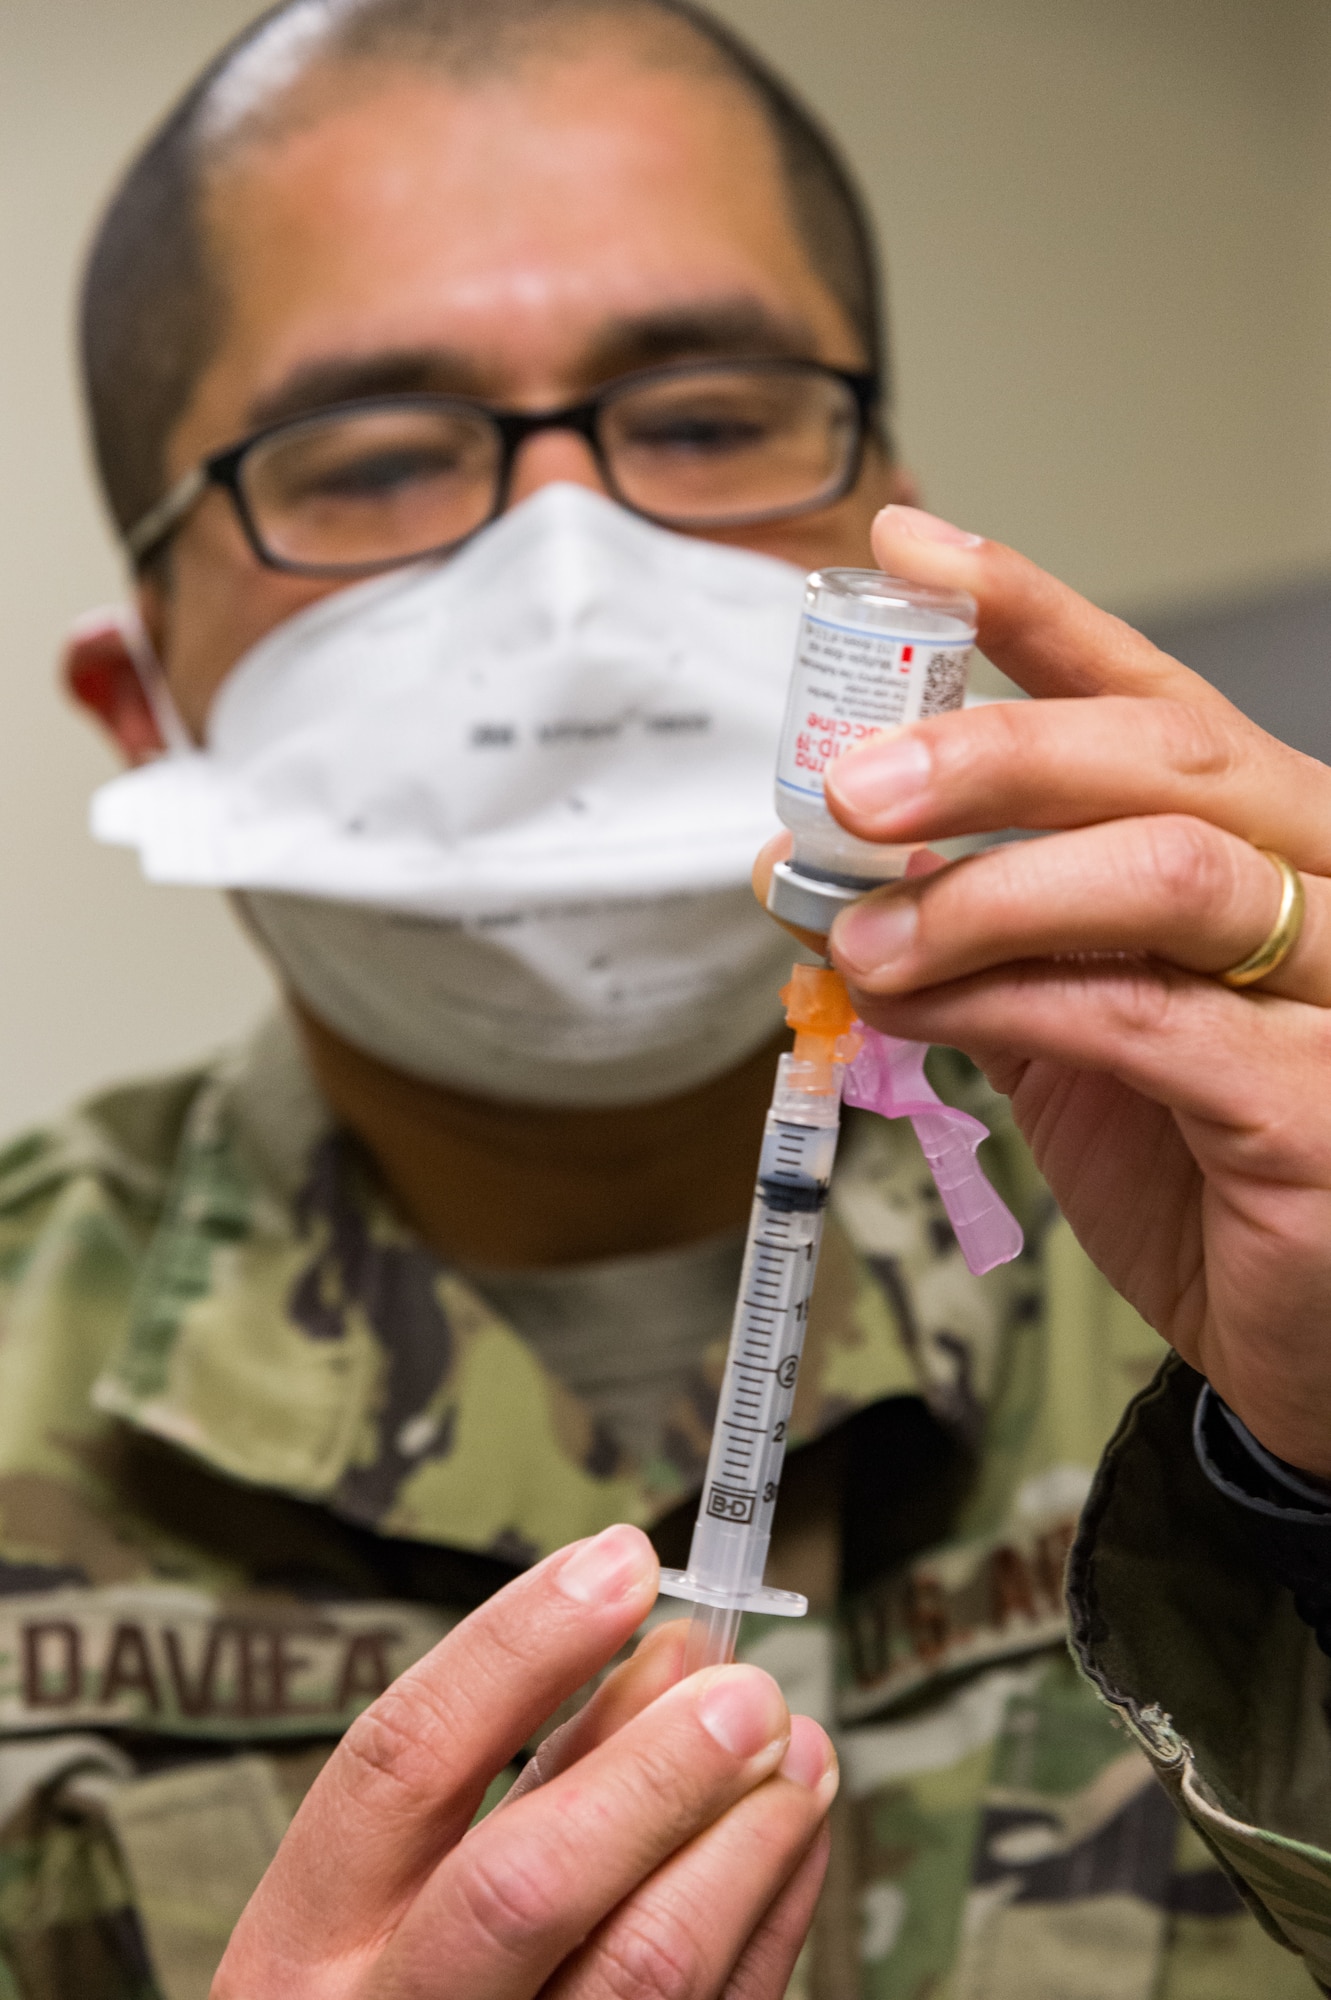 Tech. Sgt. Juan Davila, 436th Operational Medical Readiness Squadron flight operational medicine noncommissioned officer in charge, prepares a single dosage of the COVID-19 vaccine Jan. 15, 2021, at Dover Air Force Base, Delaware. Davila prepared syringes to be administered to the first Team Dover frontline workers who volunteered to receive the vaccine and were identified as eligible in concurrence with Department of Defense guidance. (U.S. Air Force photo by Roland Balik)